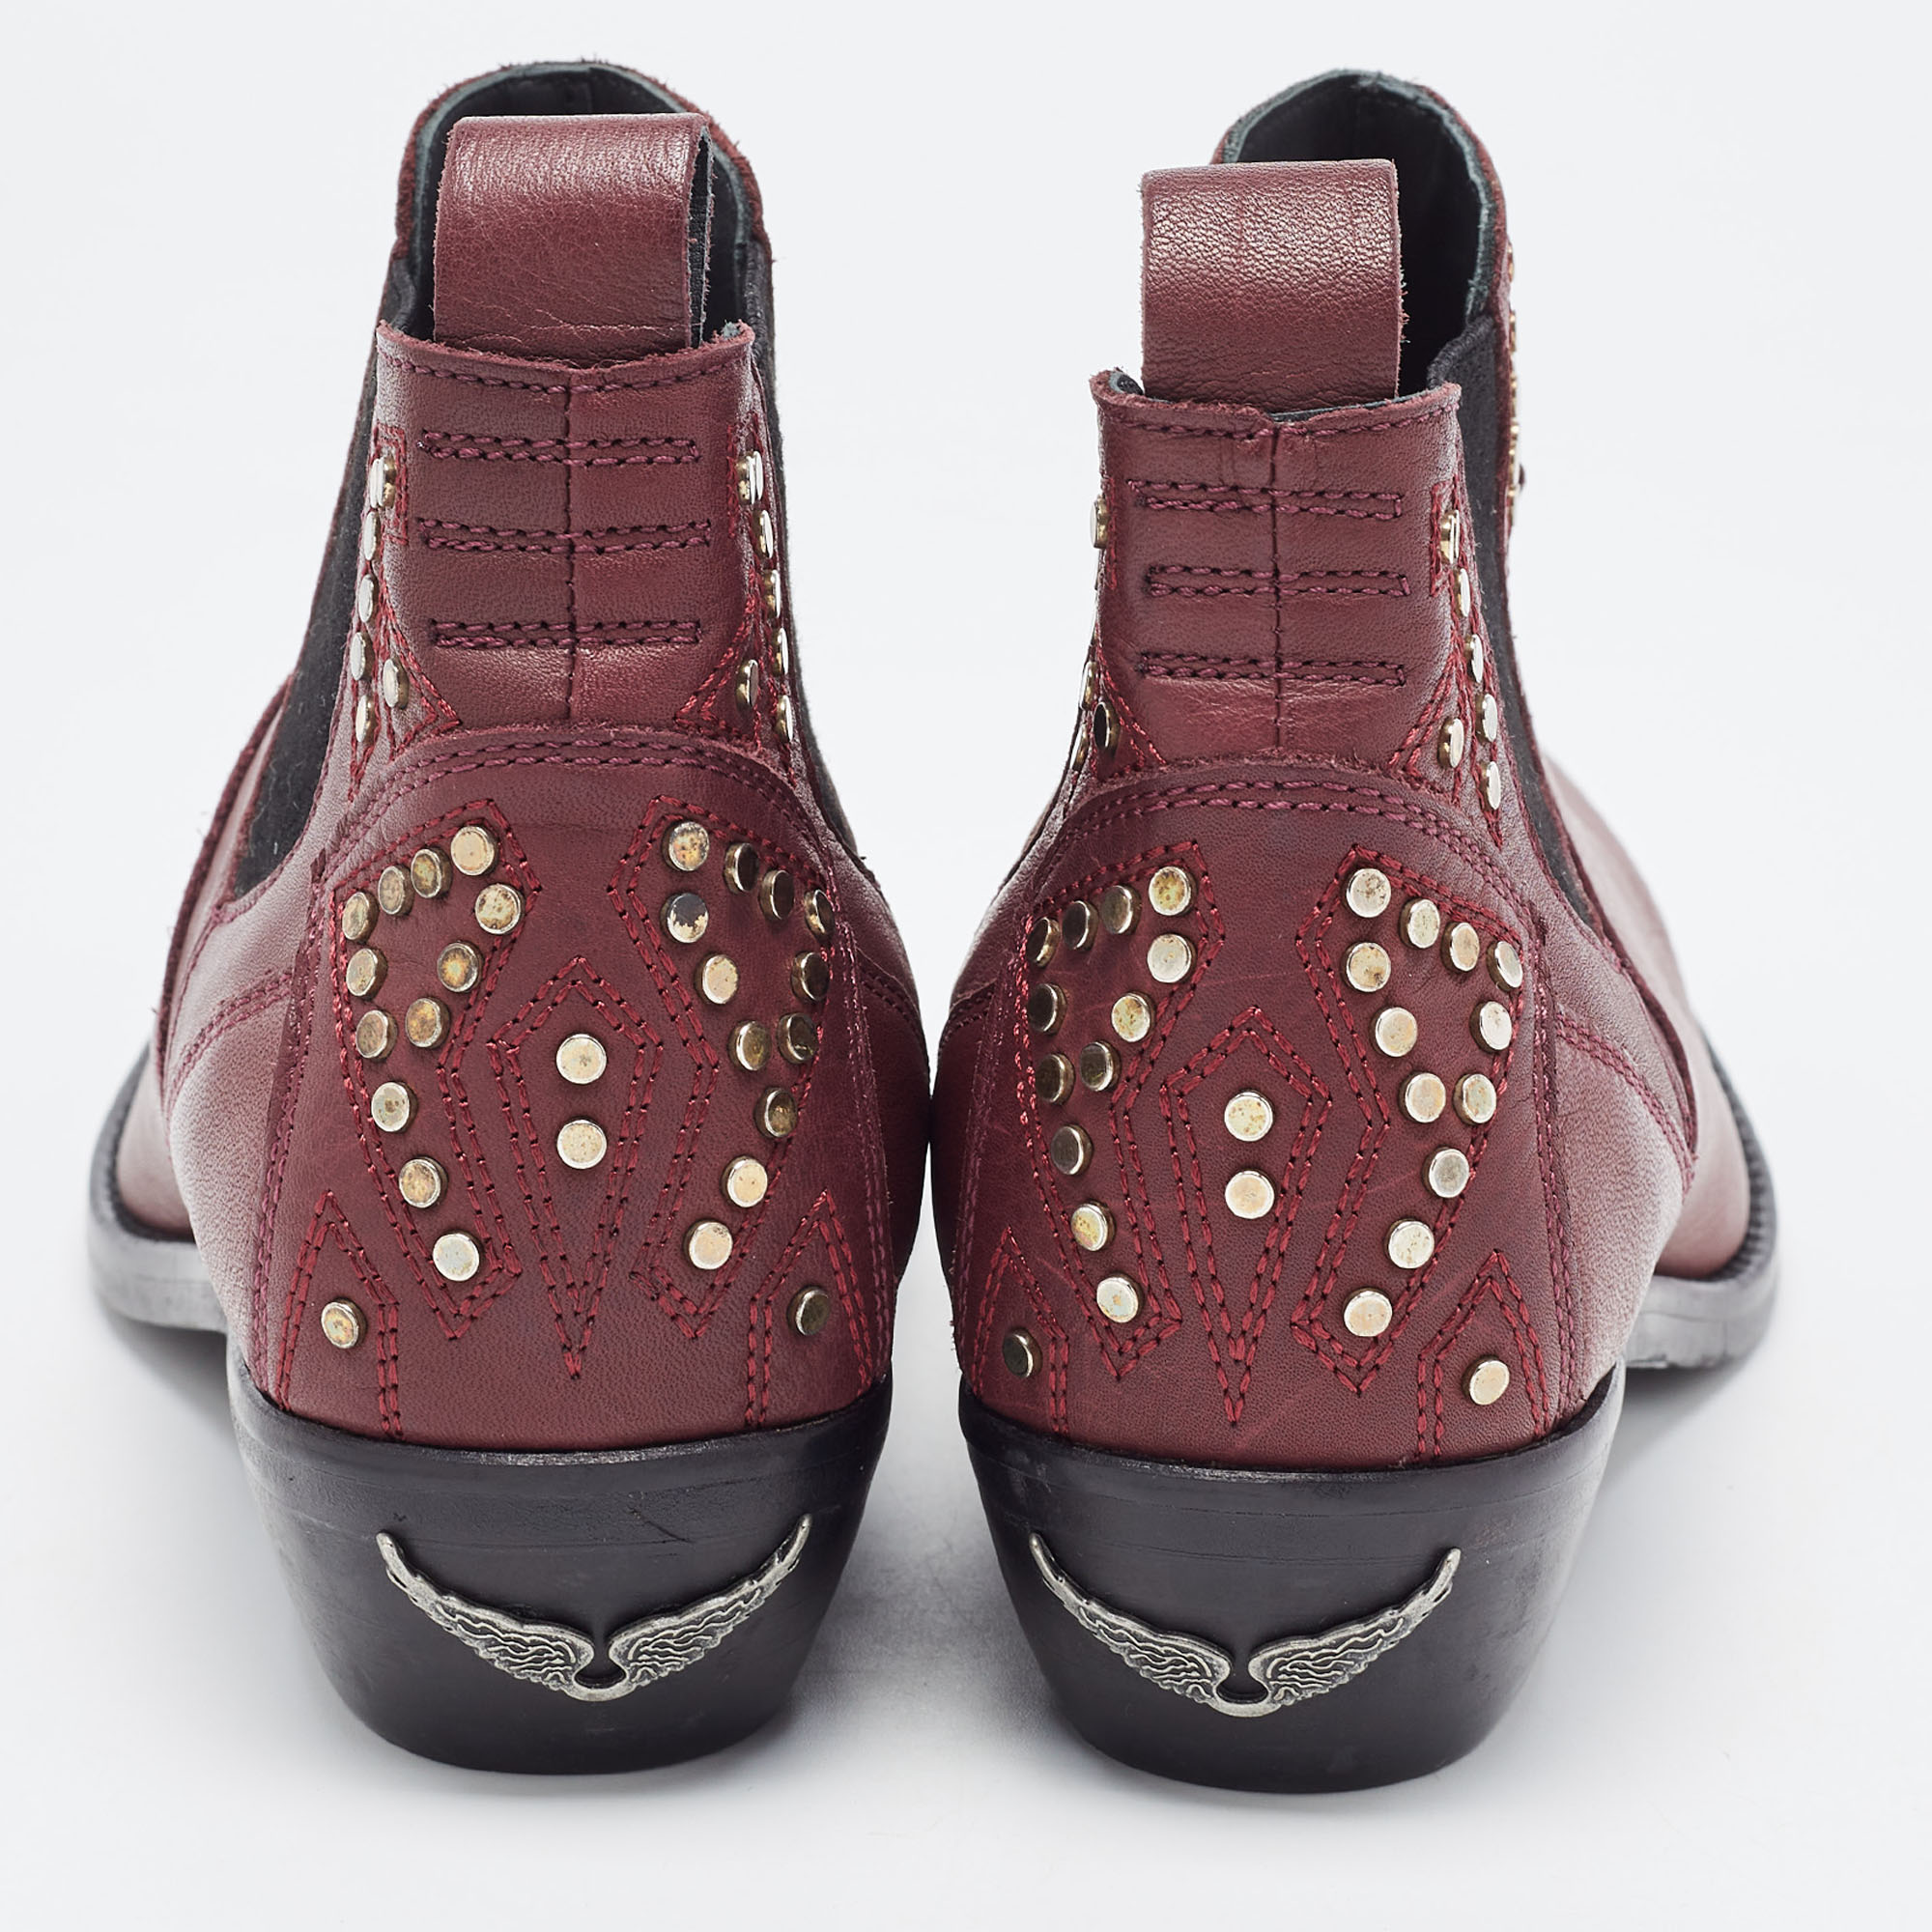 Zadig & Voltaire Burgundy Leather Ankle Boots Size 37